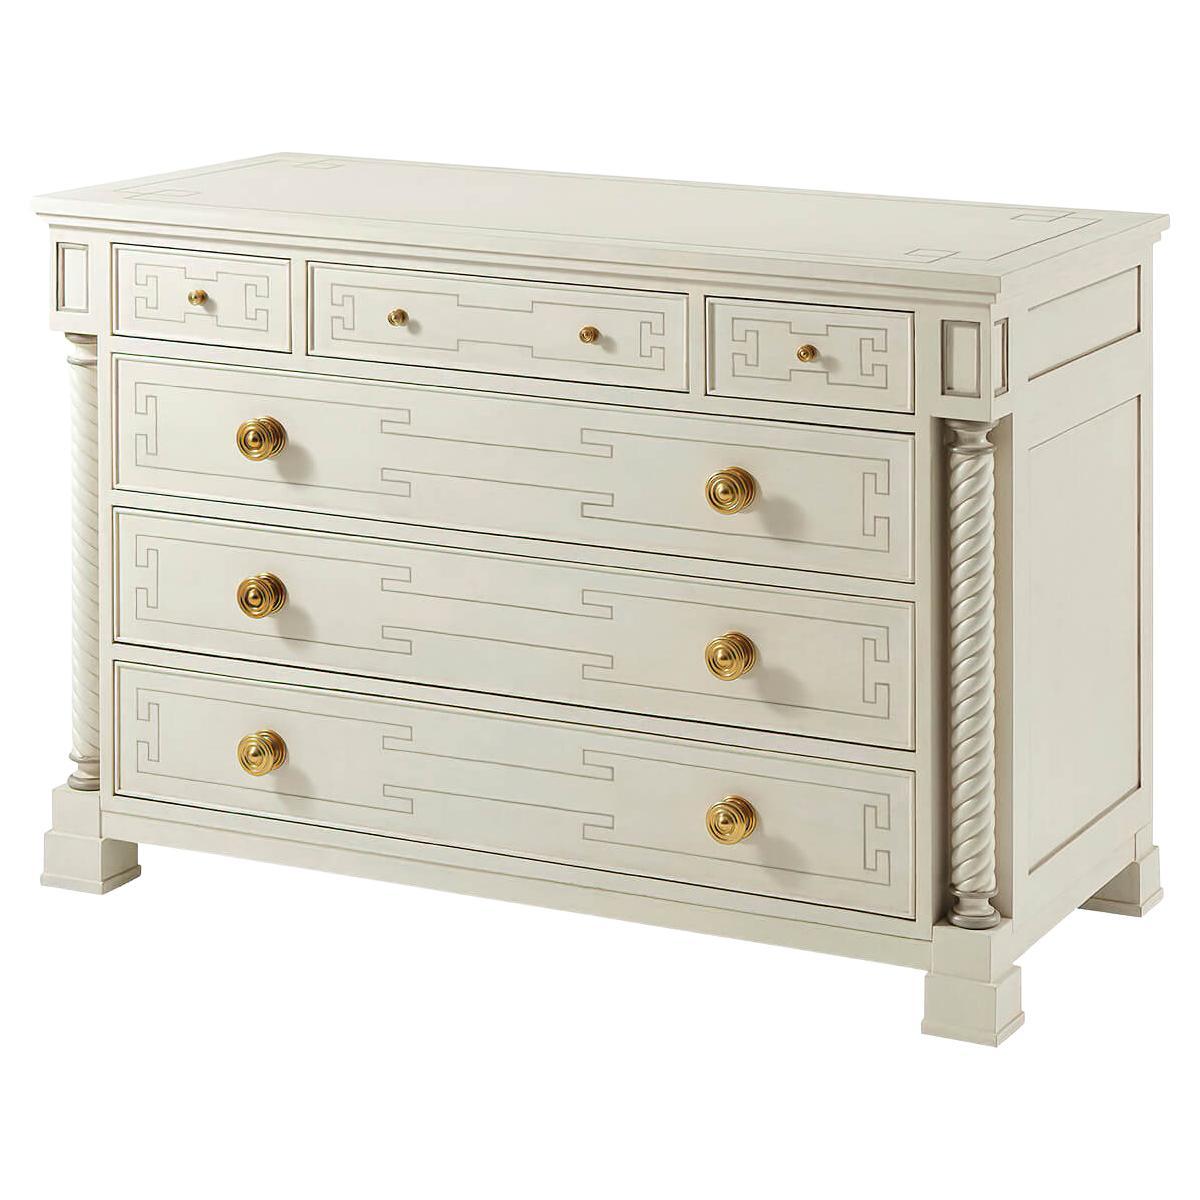 Painted Neo Classic Chest of Drawers